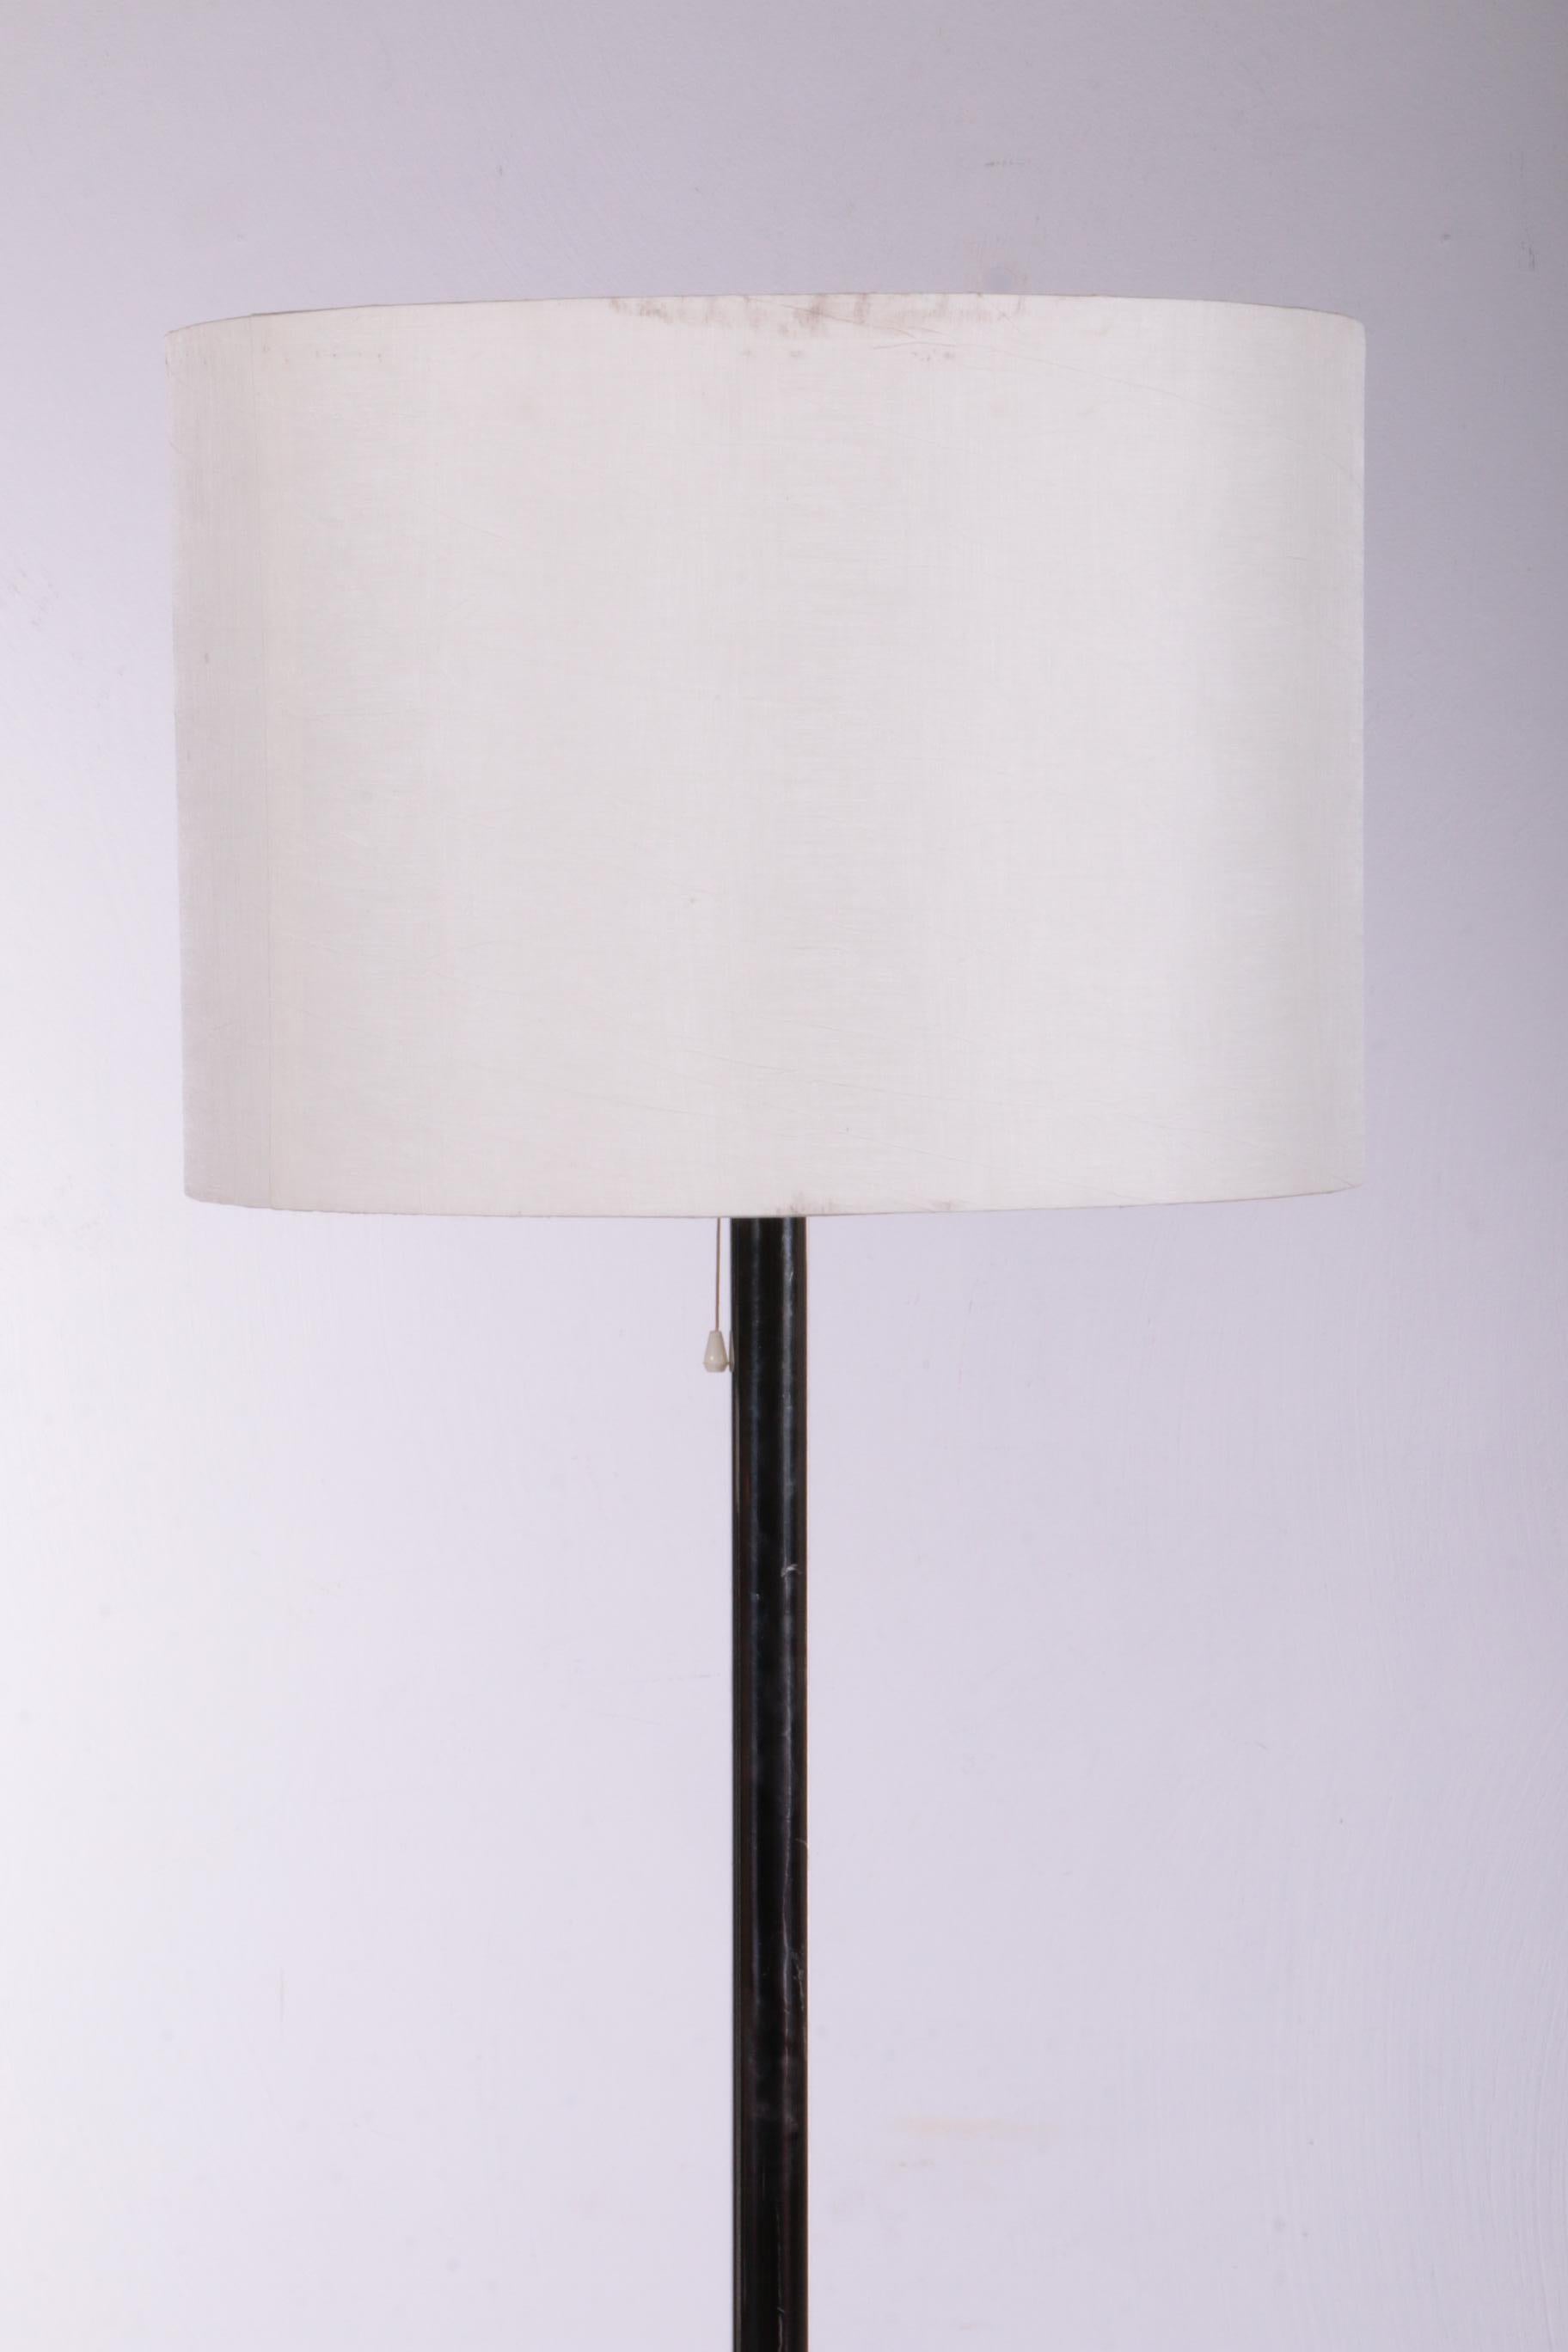 Large Floor Lamp with Chrome Stem and 3 Light Fittings in the Shade by Temde For Sale 6